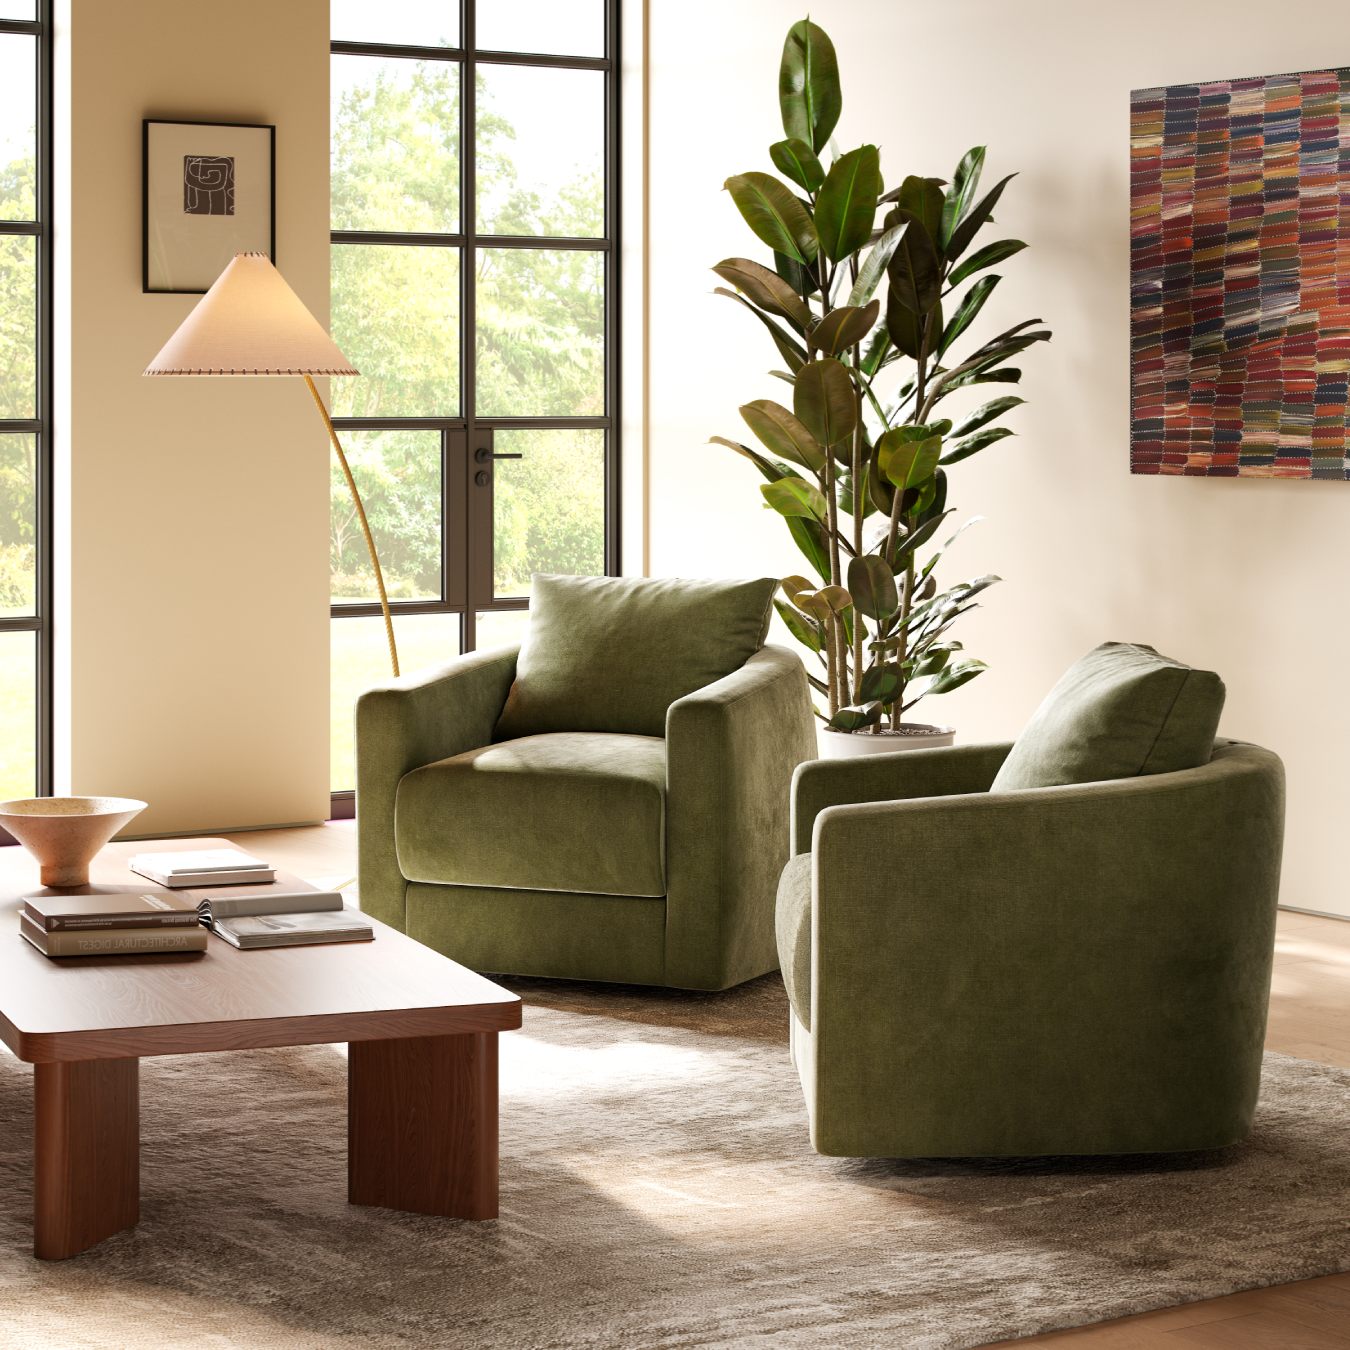 A pair of green round tub chairs in a modern living room